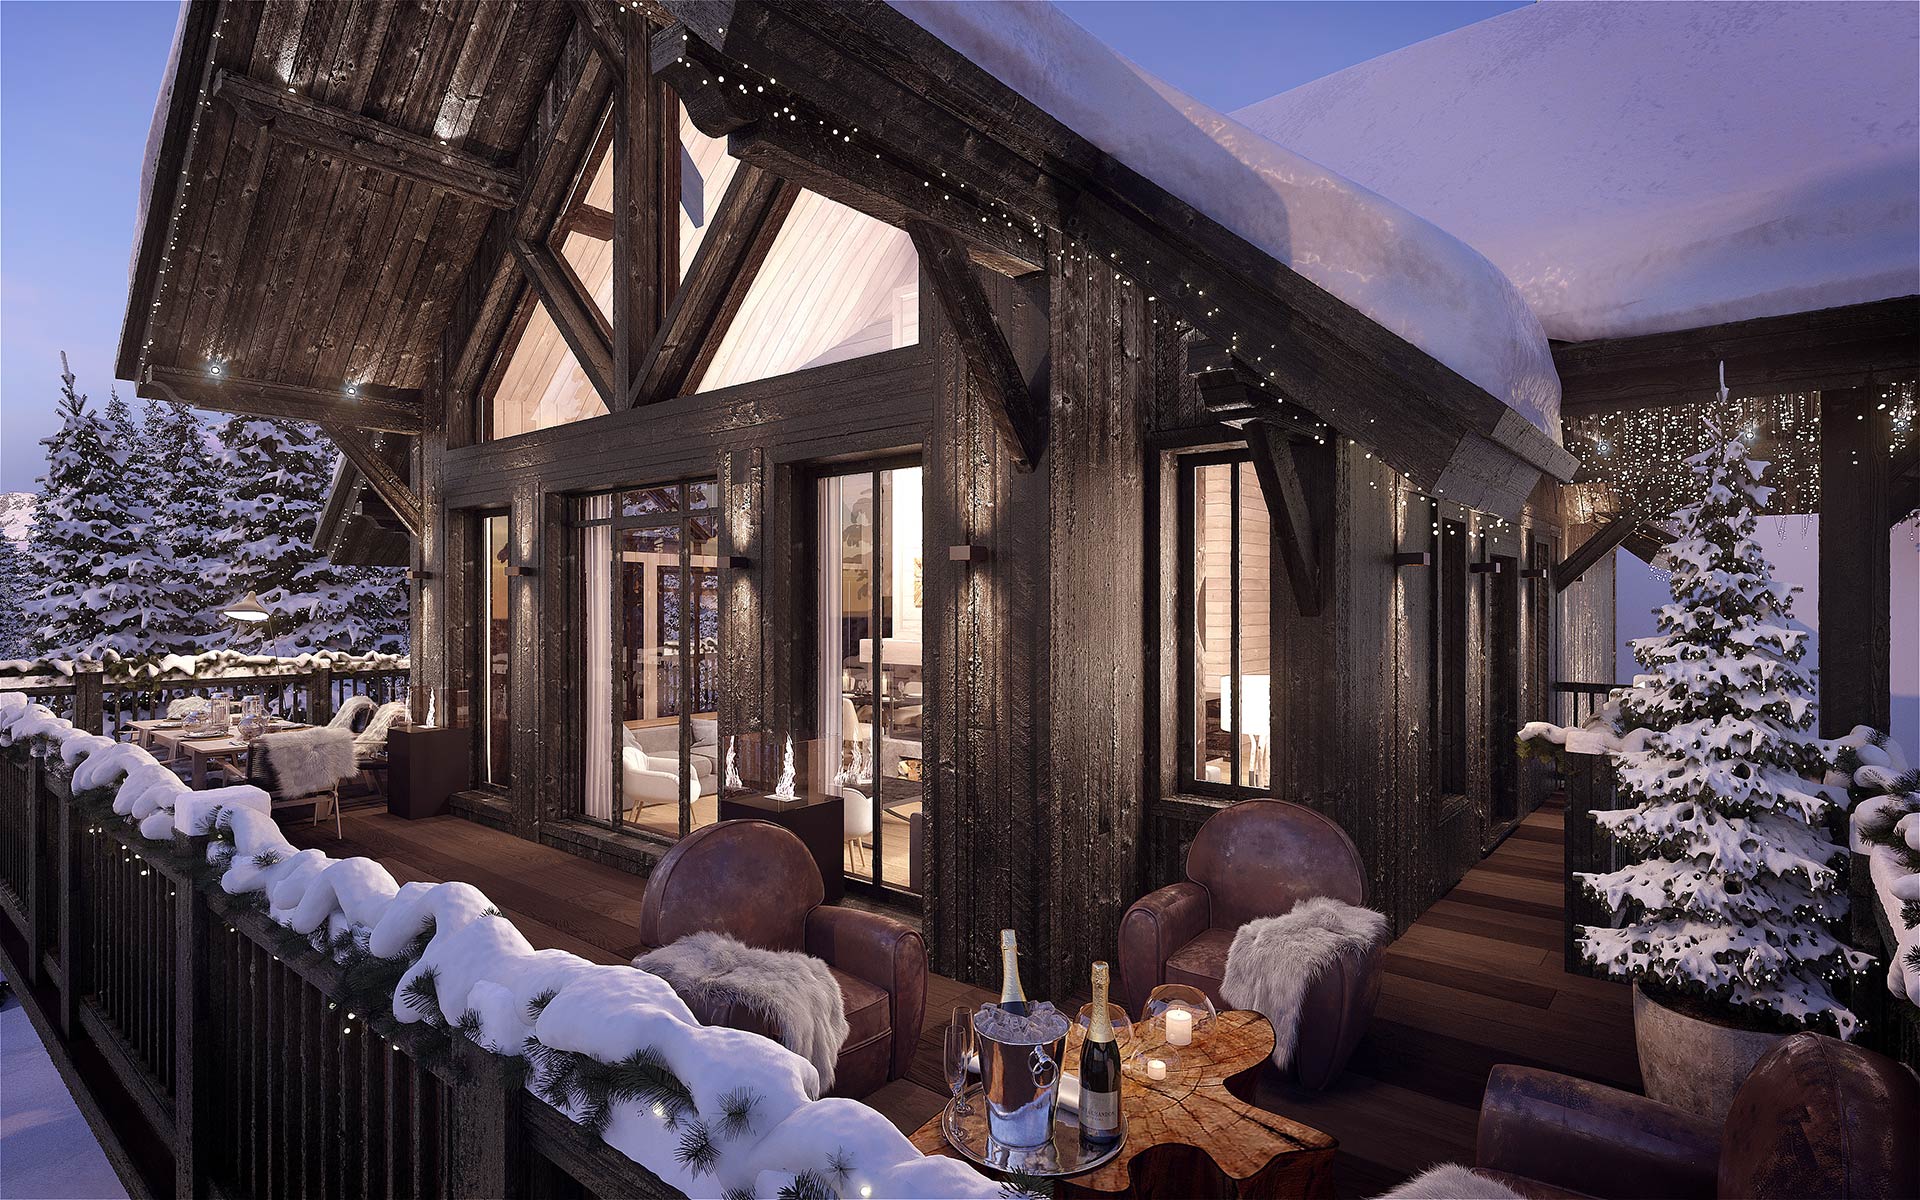 Digital 3D image of a luxurious chalet in a snowy mood